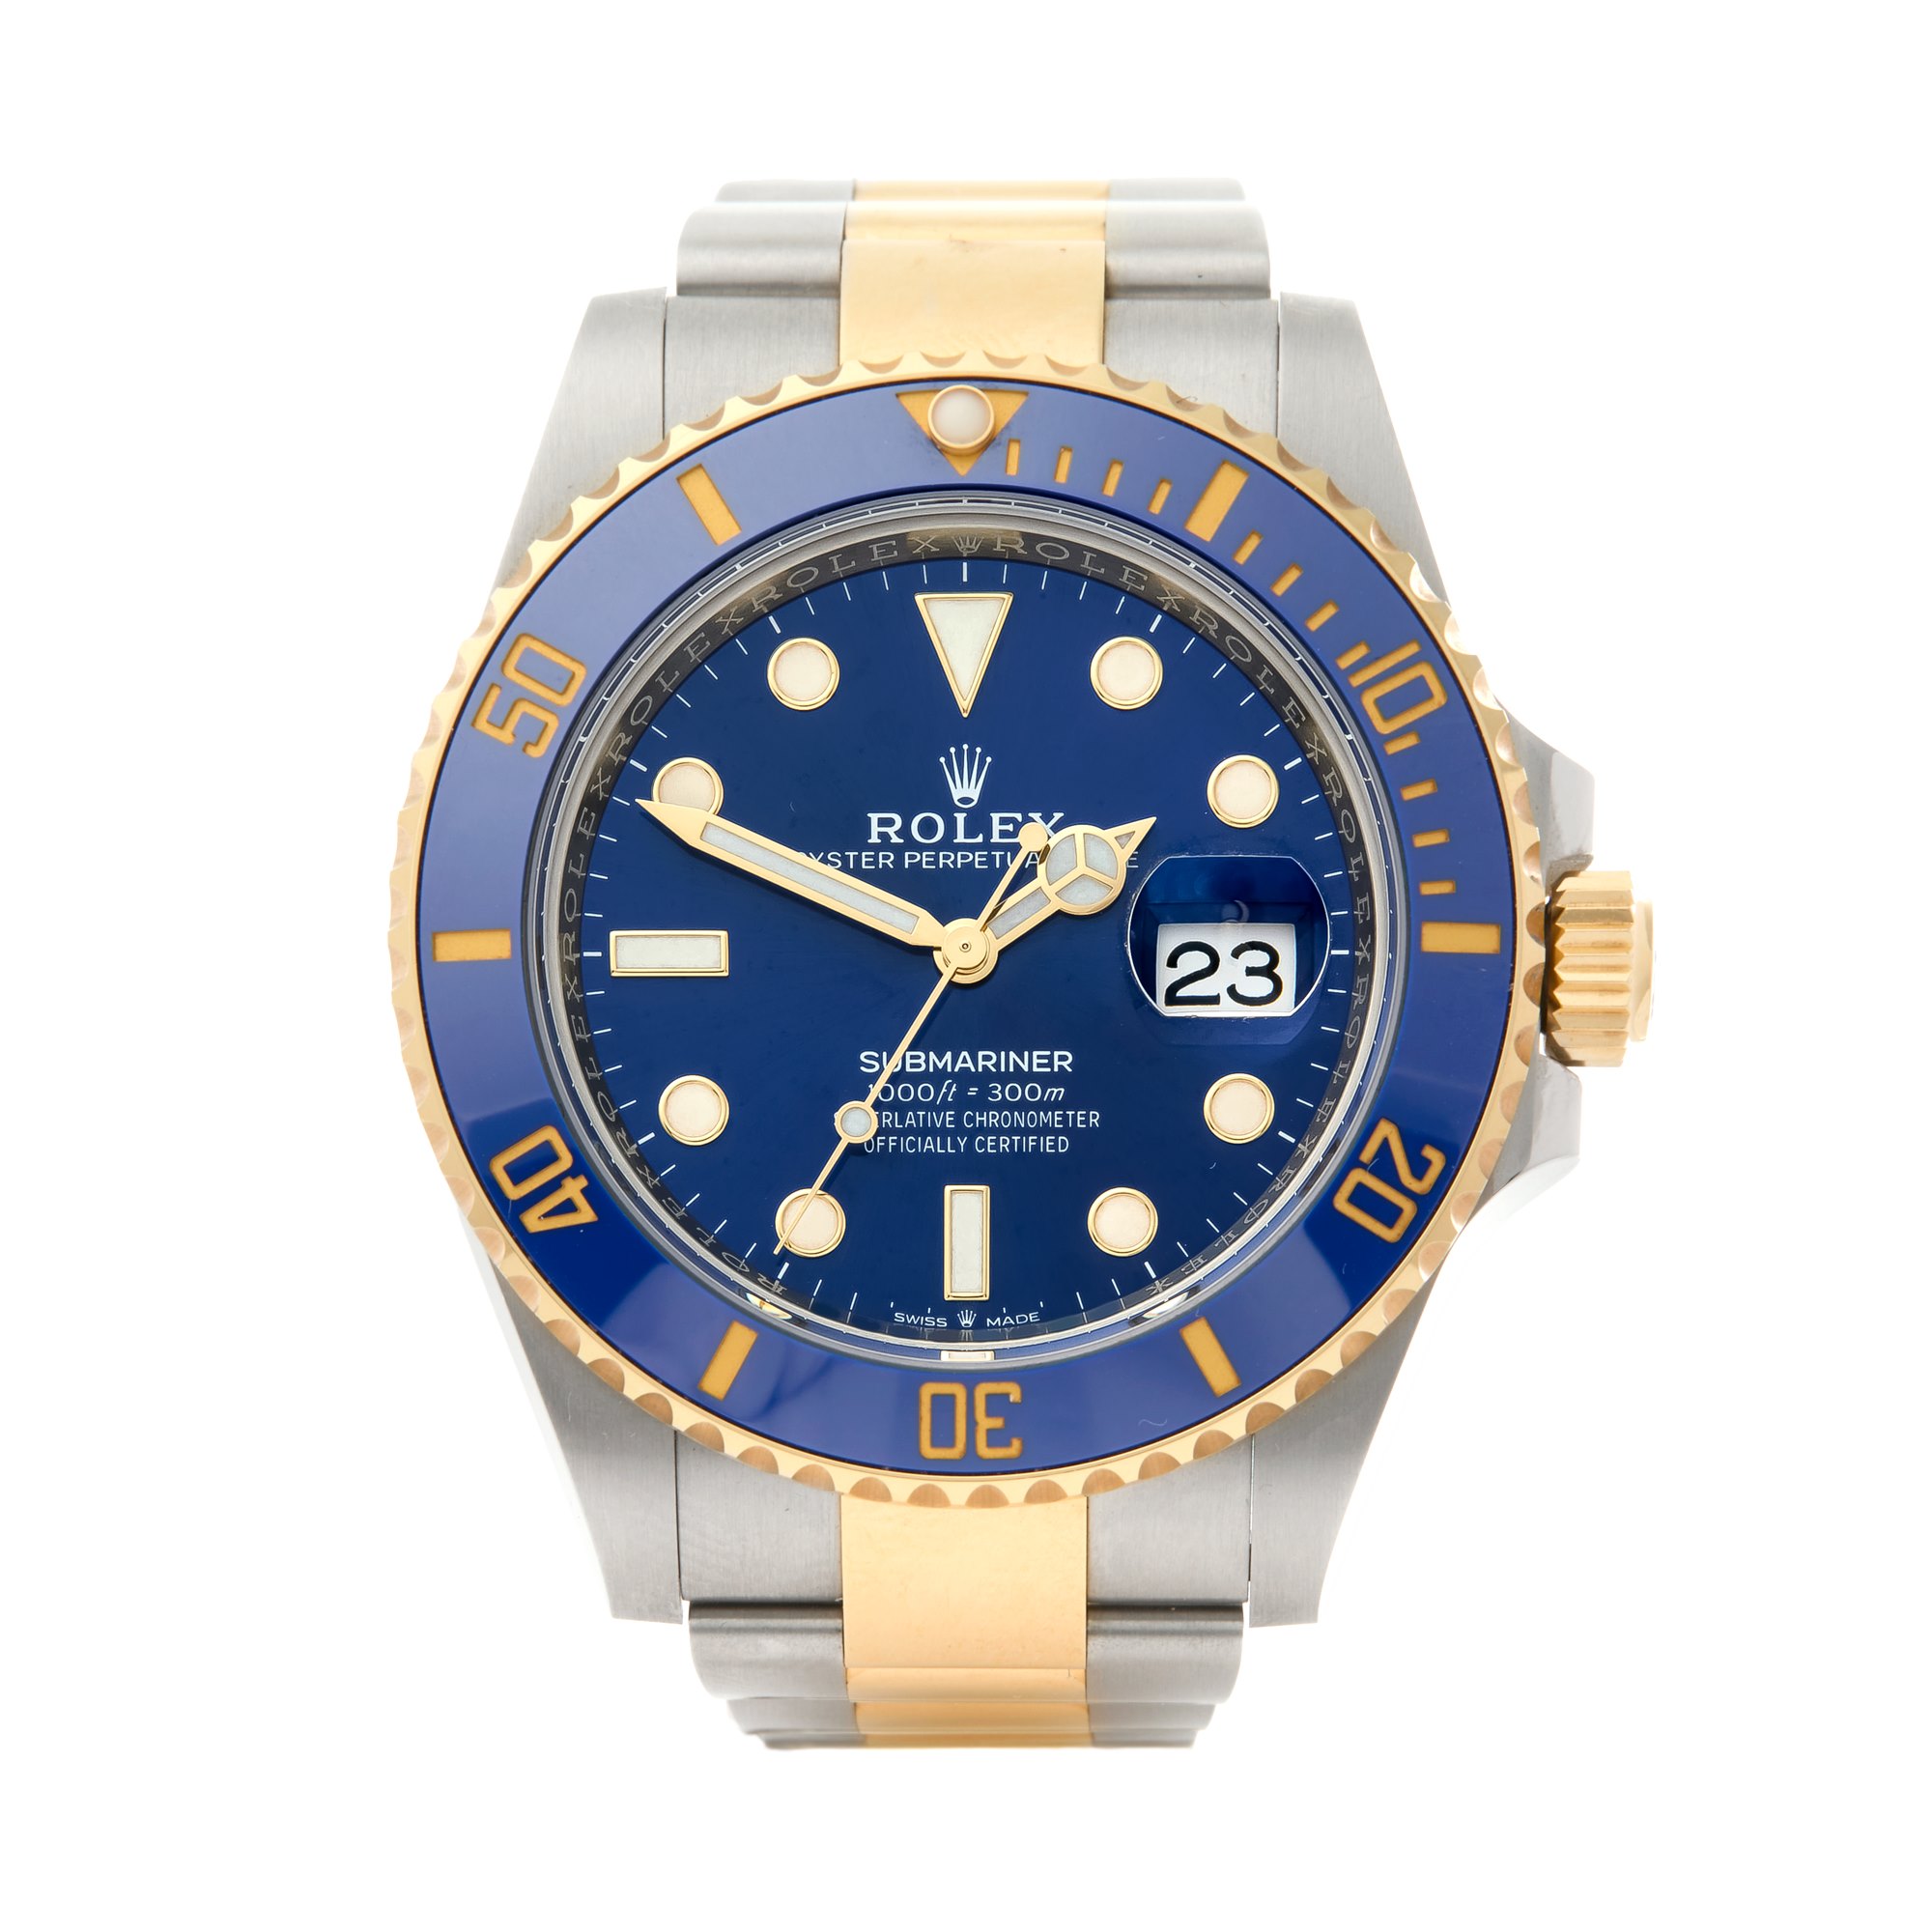 Rolex Submariner Yellow Gold & Stainless Steel 126613LB